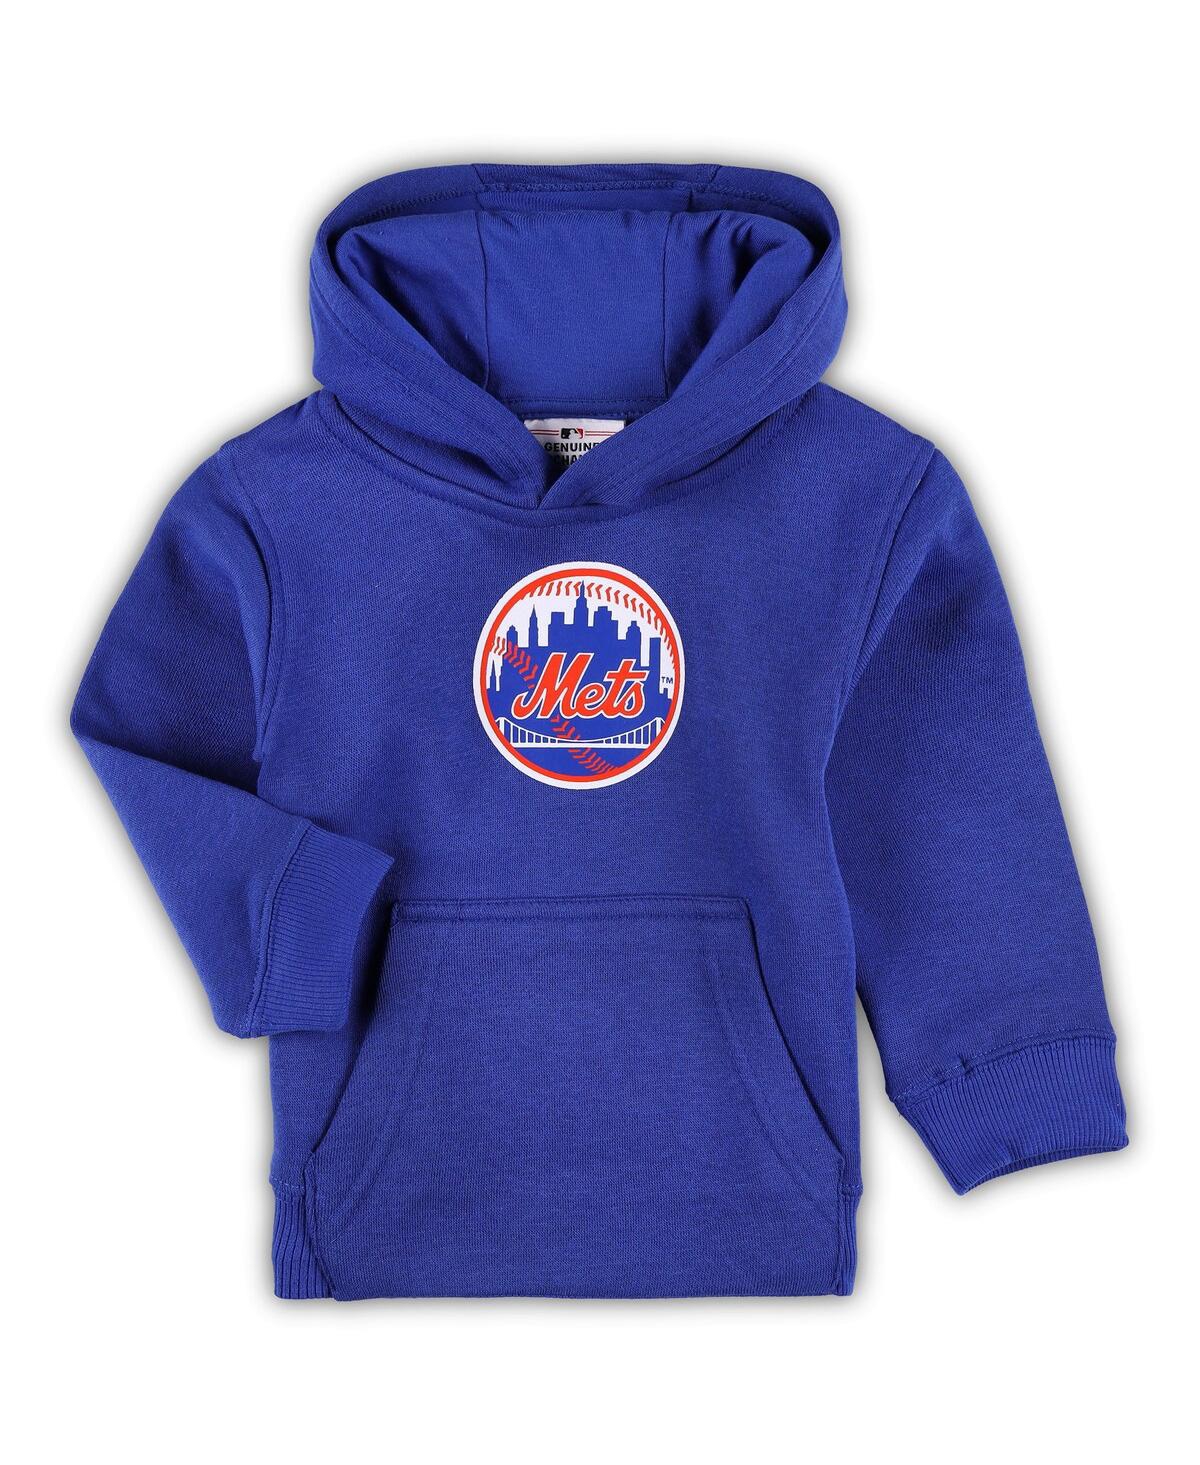 Outerstuff Babies' Toddler Boys And Girls Royal New York Islanders Primary Logo Pullover Hoodie